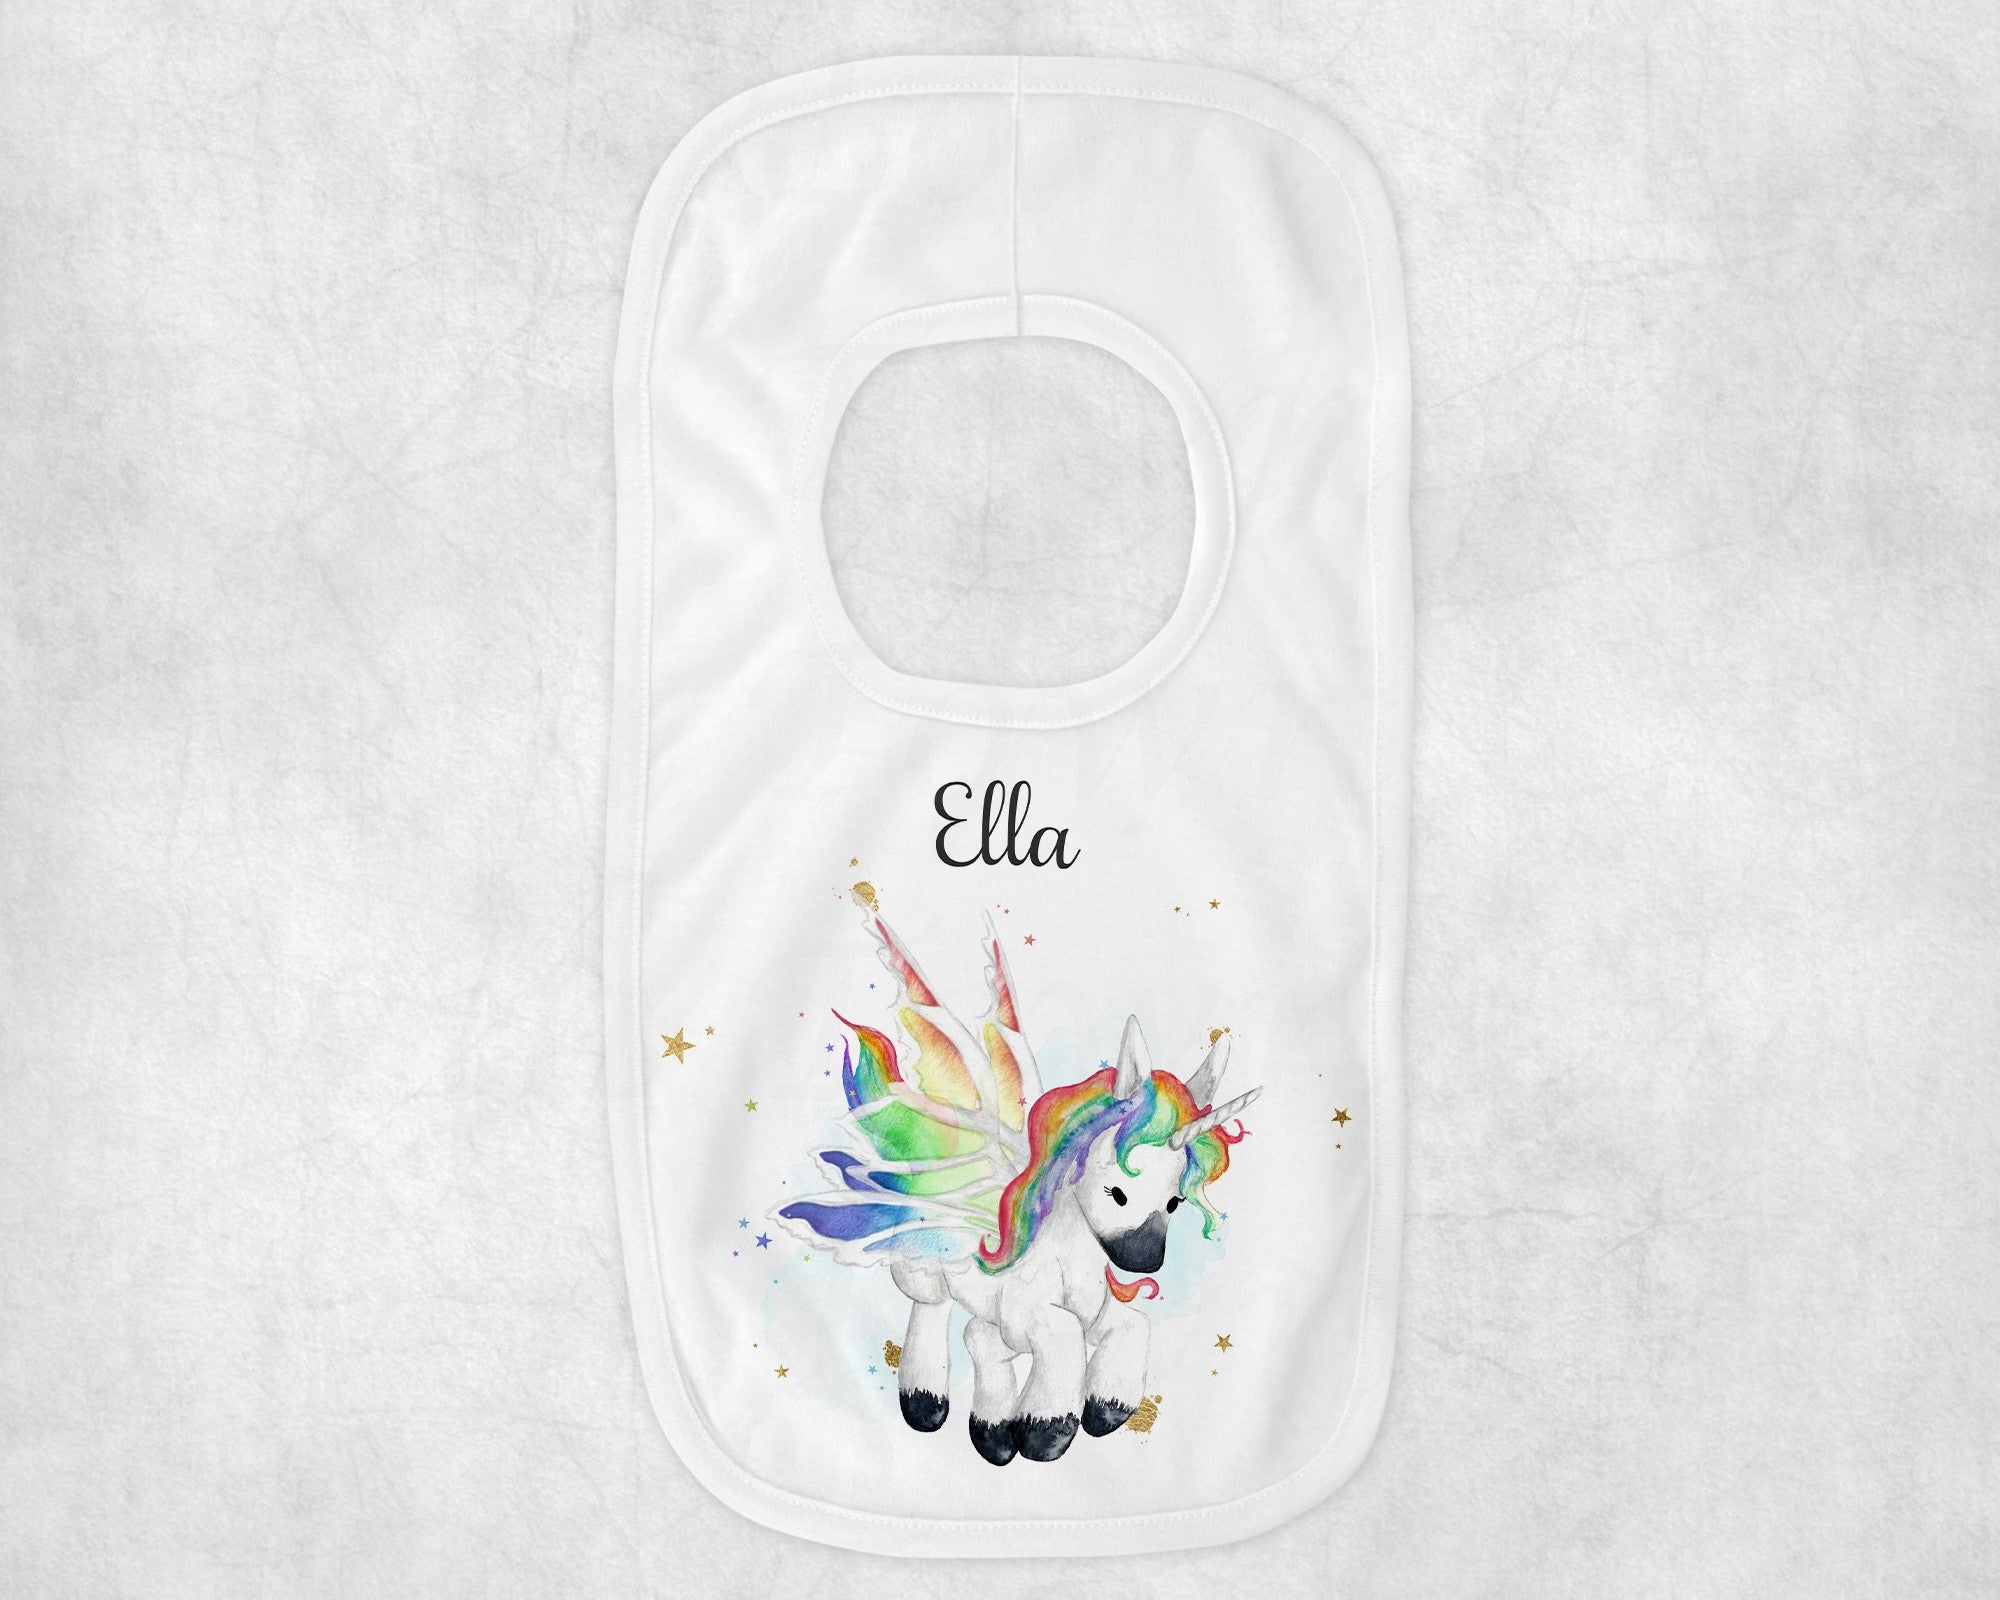 Customisable Unicorn Bib - Super Soft and Absorbent for Your Little One